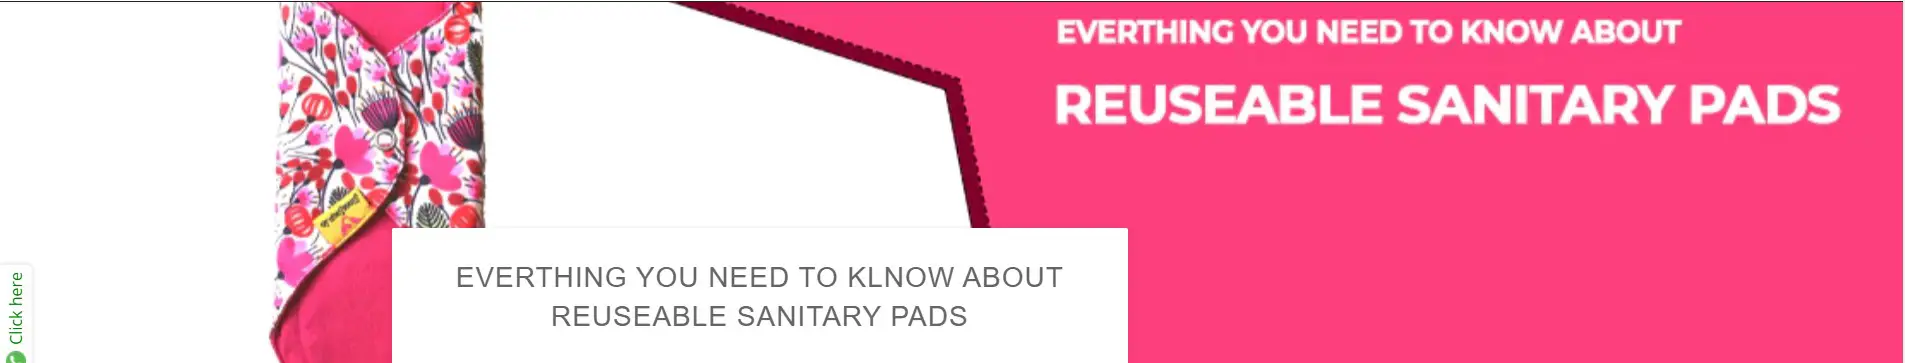 EVERTHING YOU NEED TO KLNOW ABOUT REUSEABLE SANITARY PADS-86a7c107